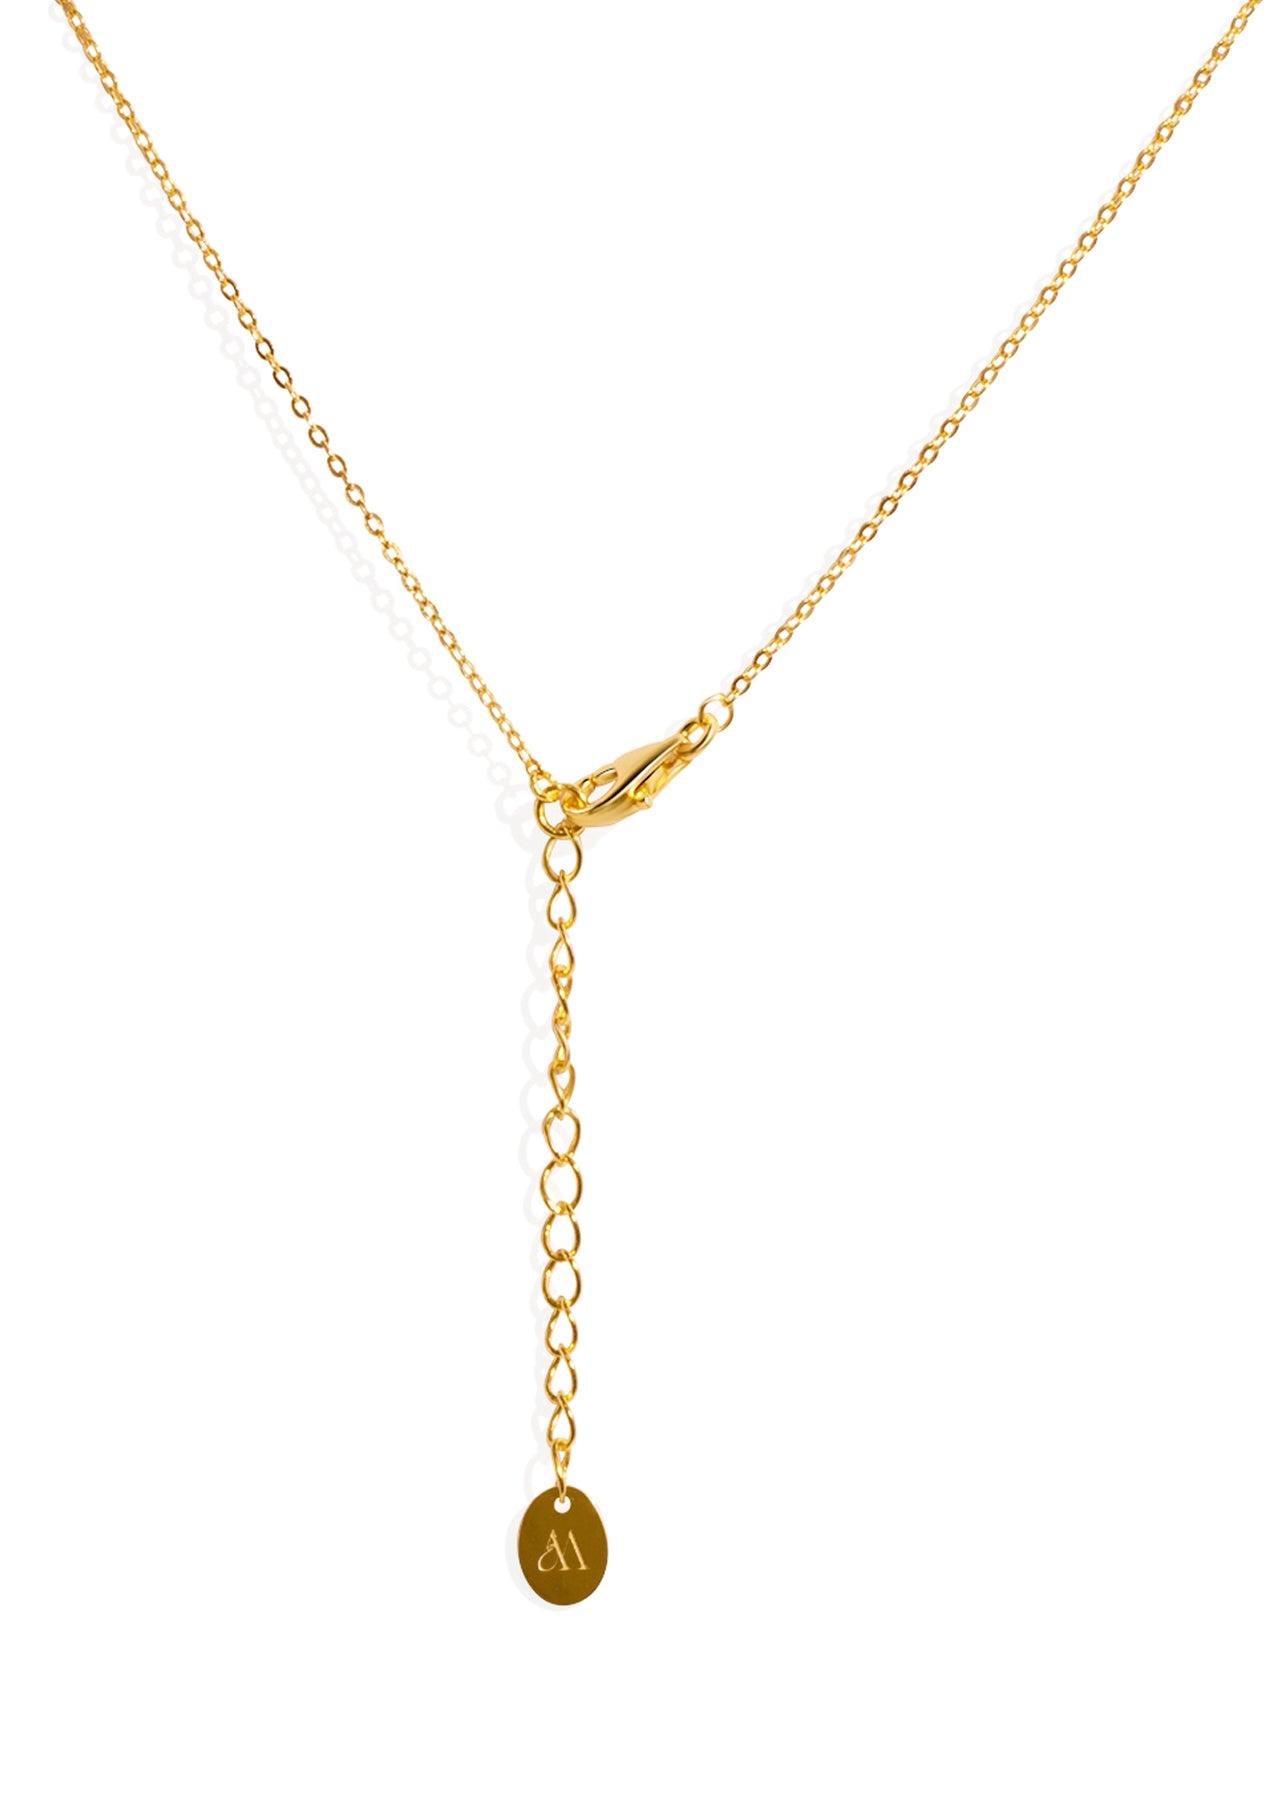 The Gold Twinkle Necklace